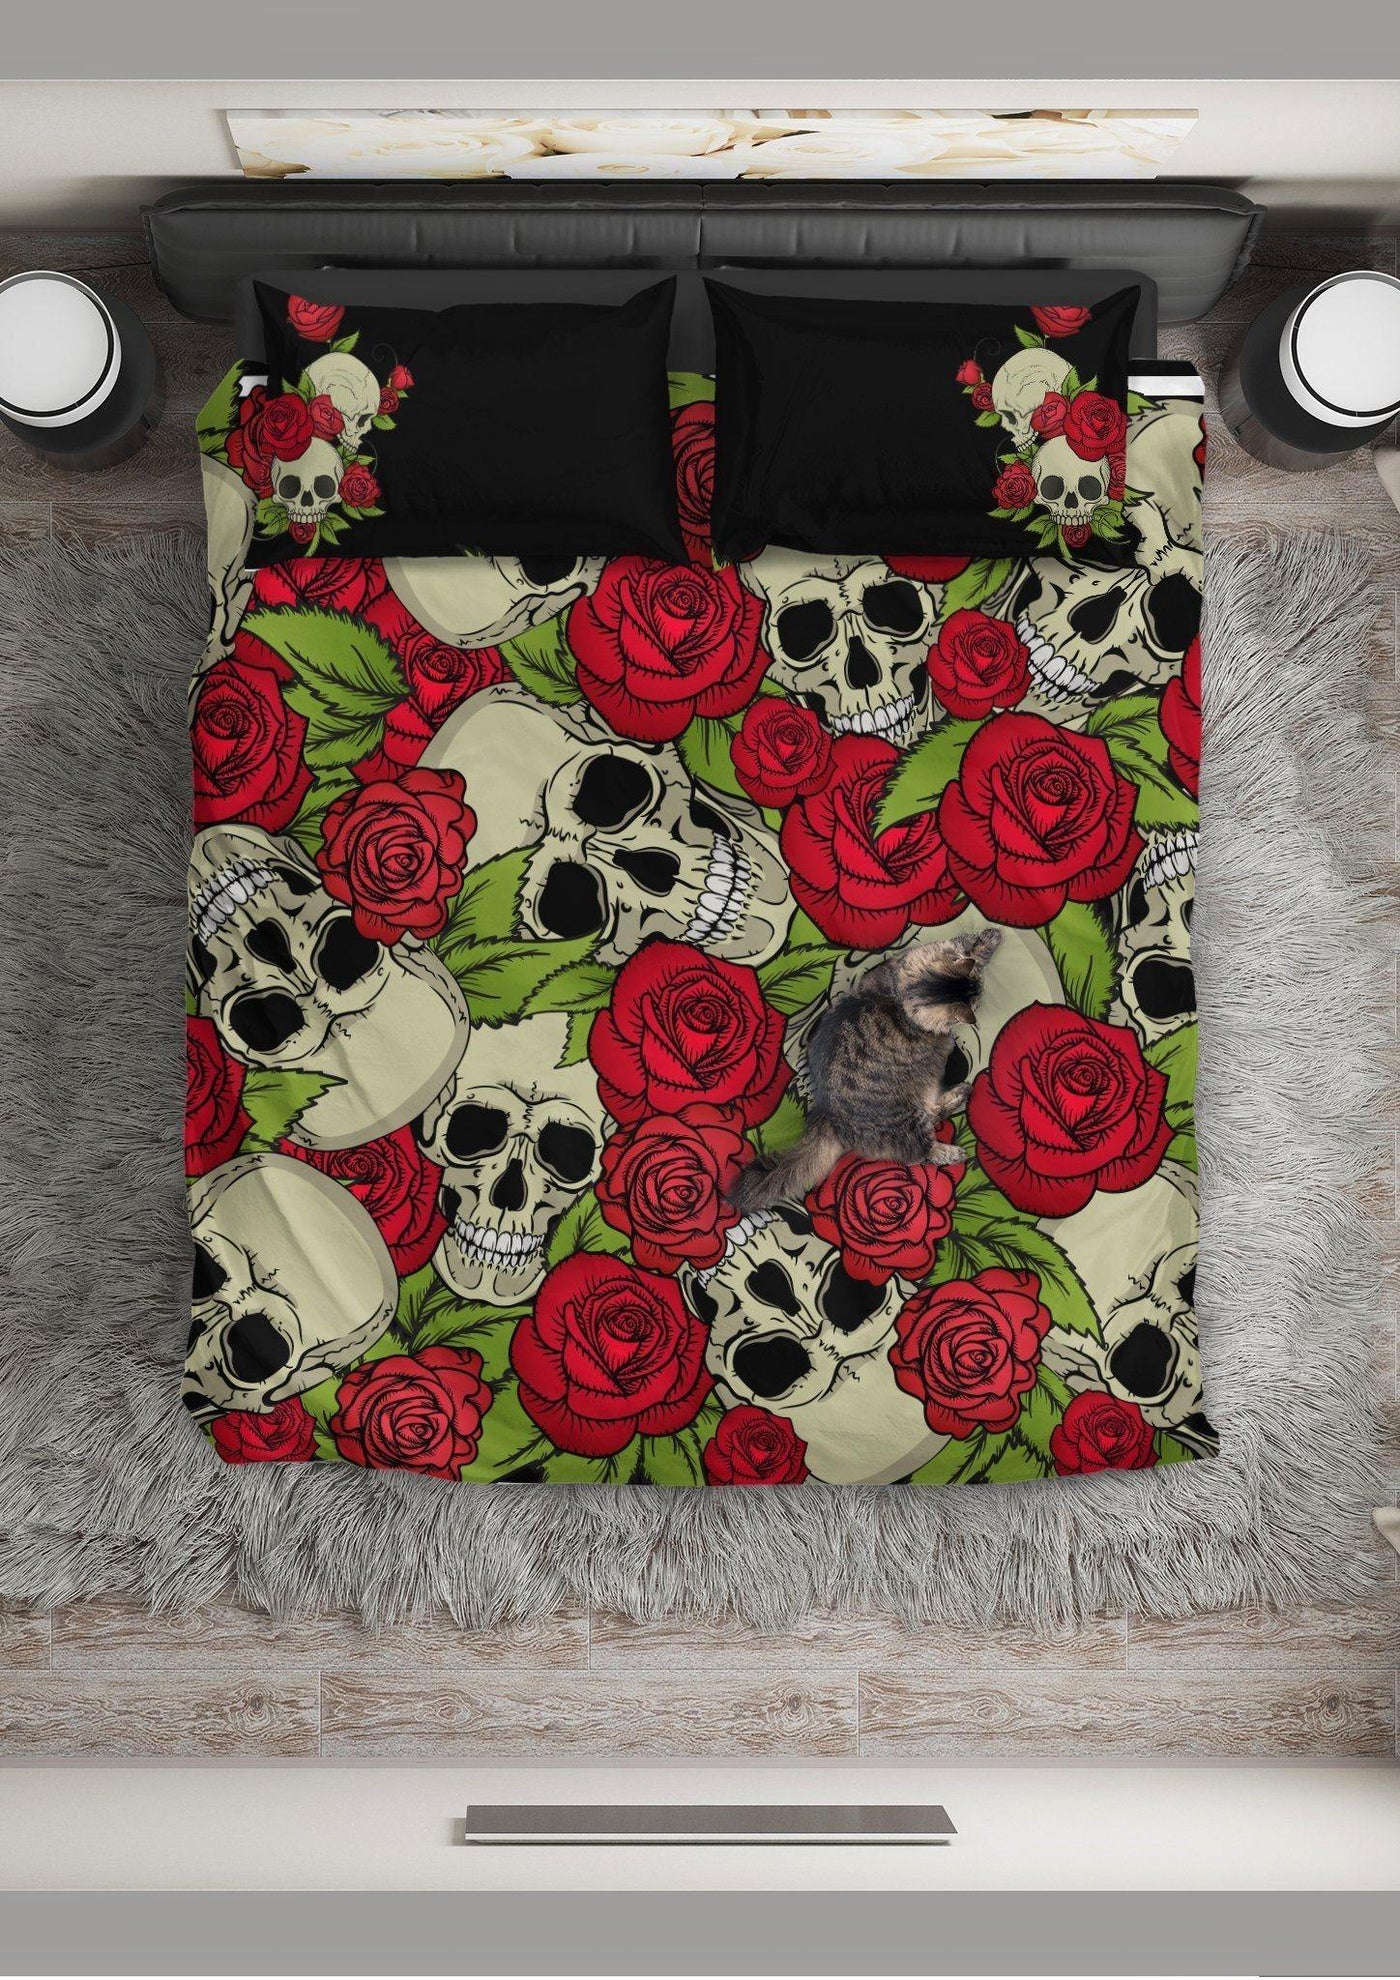 Skull & Roses Bedding Set, Polyester, Twin/Queen/King Size - American Legend Rider